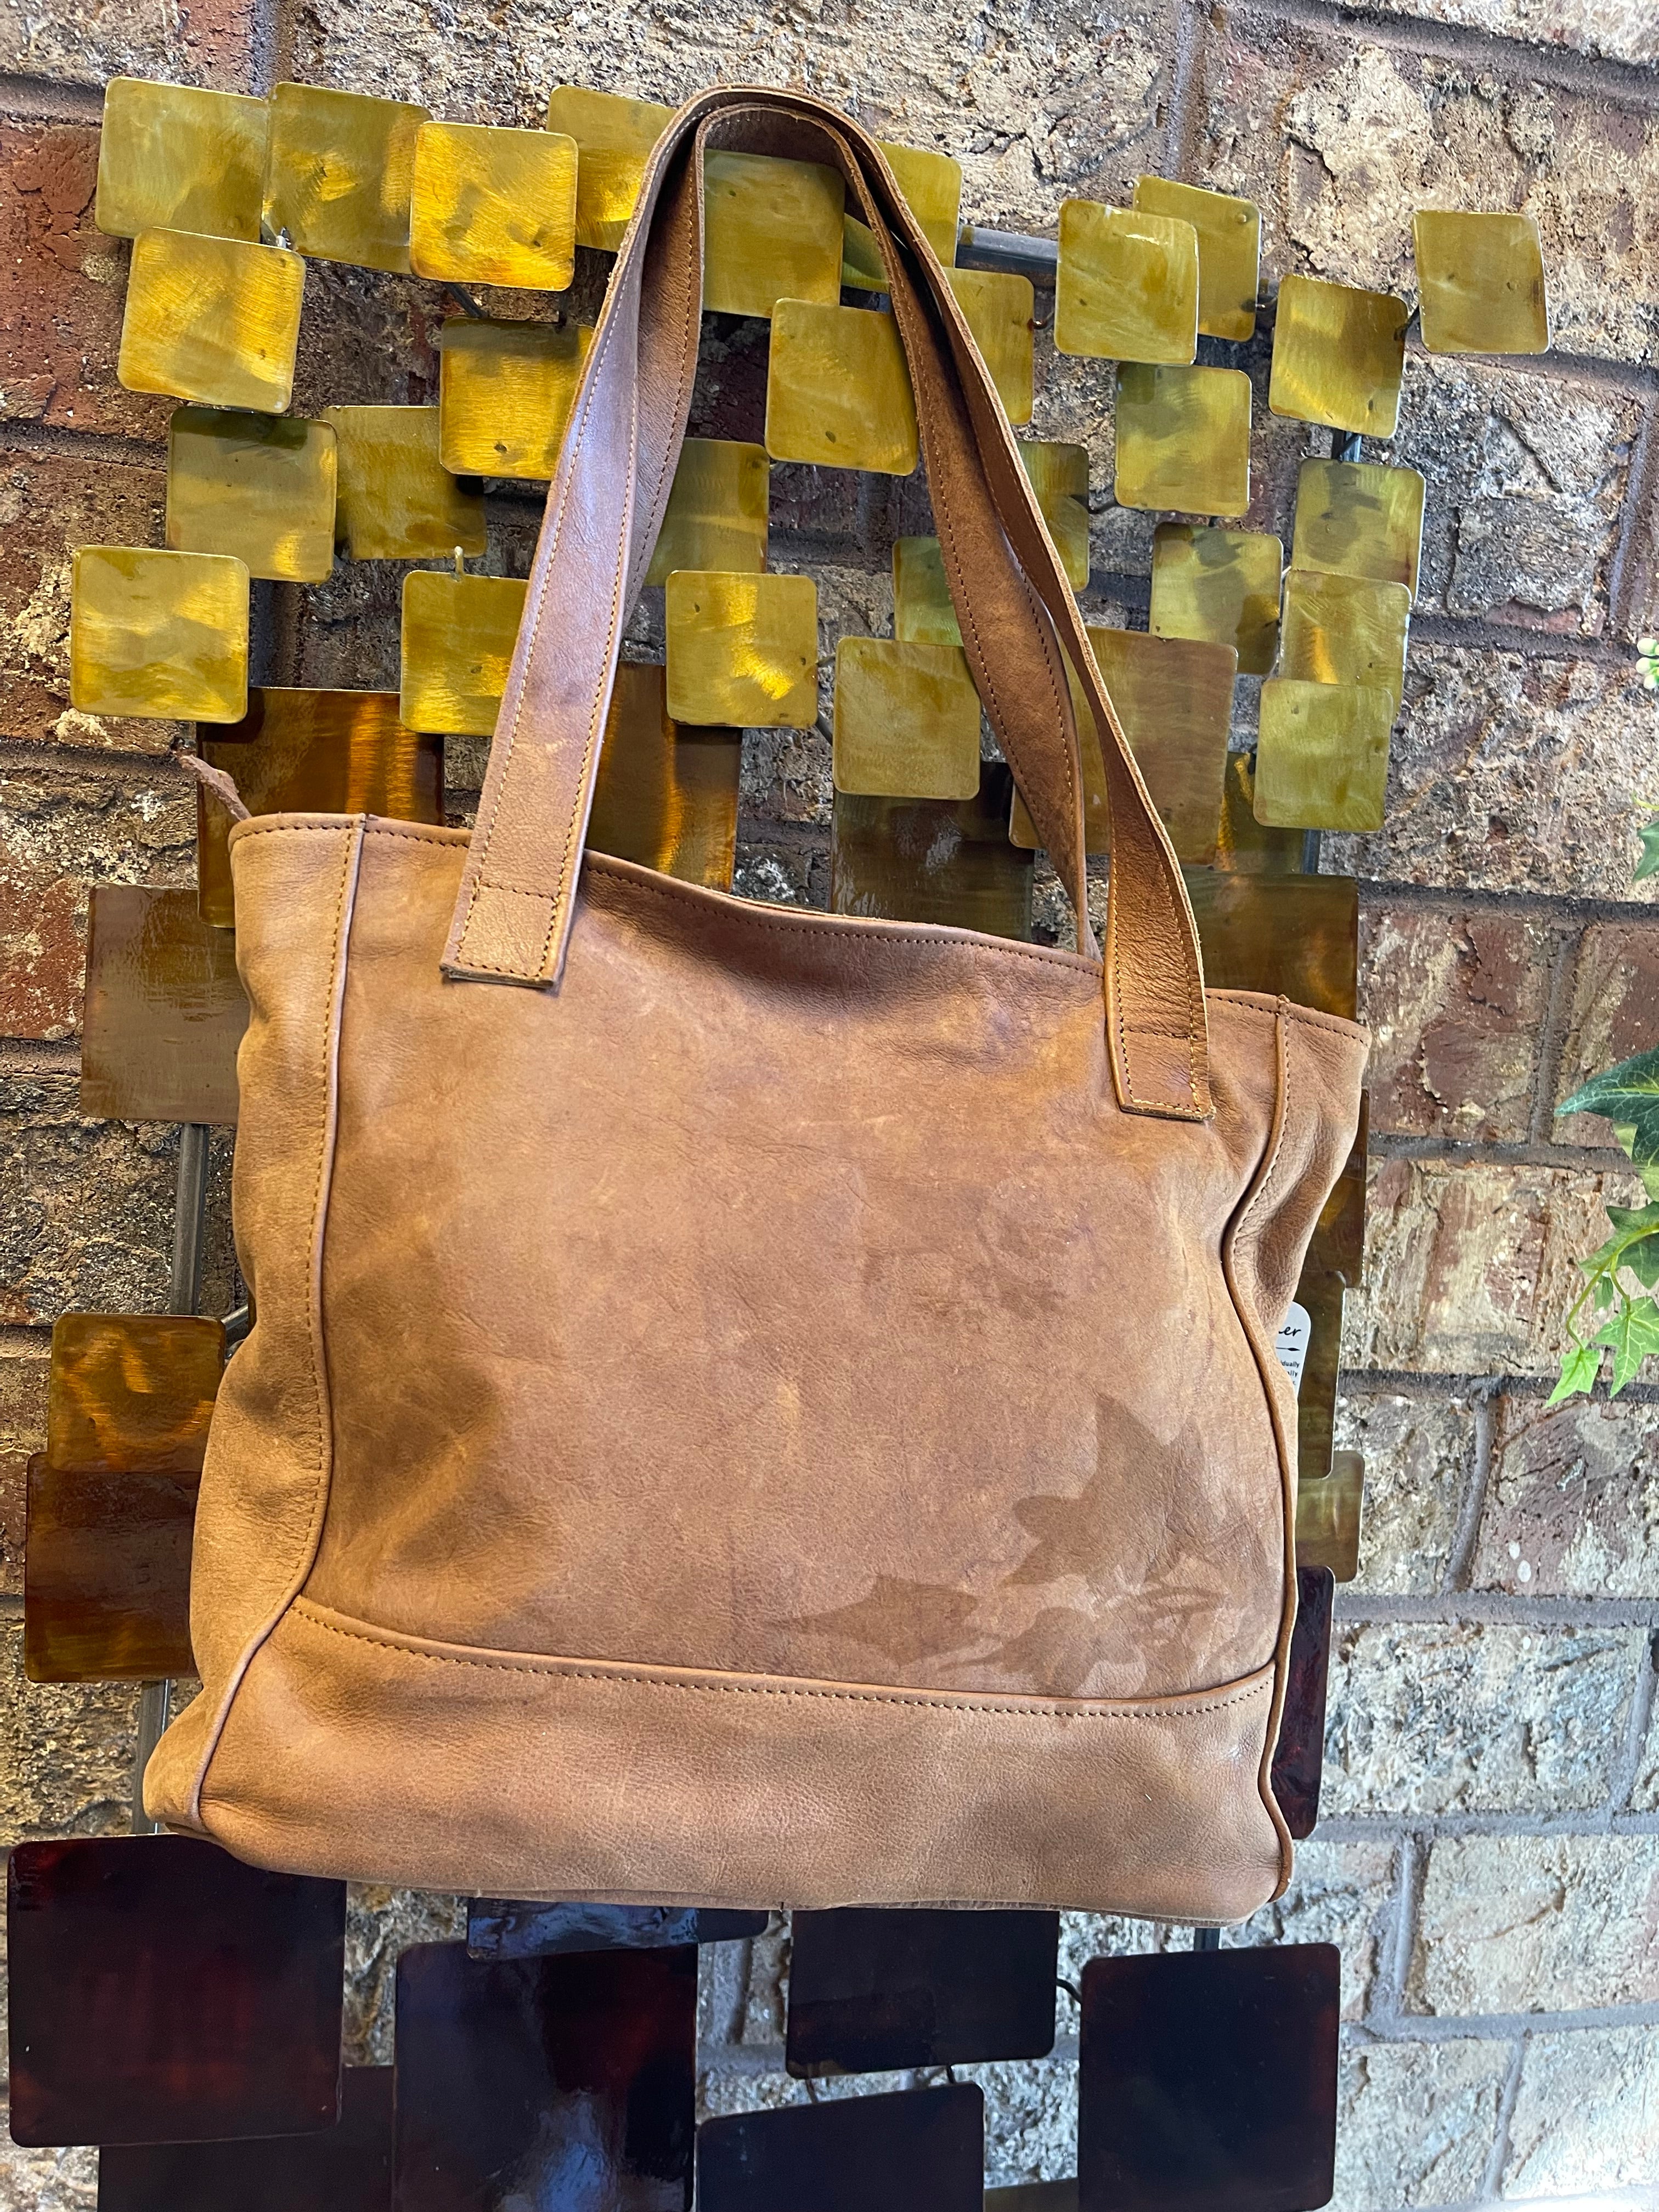 Old School Genuine Leather Ladies Hand Bag | Shop Today. Get it Tomorrow! |  takealot.com